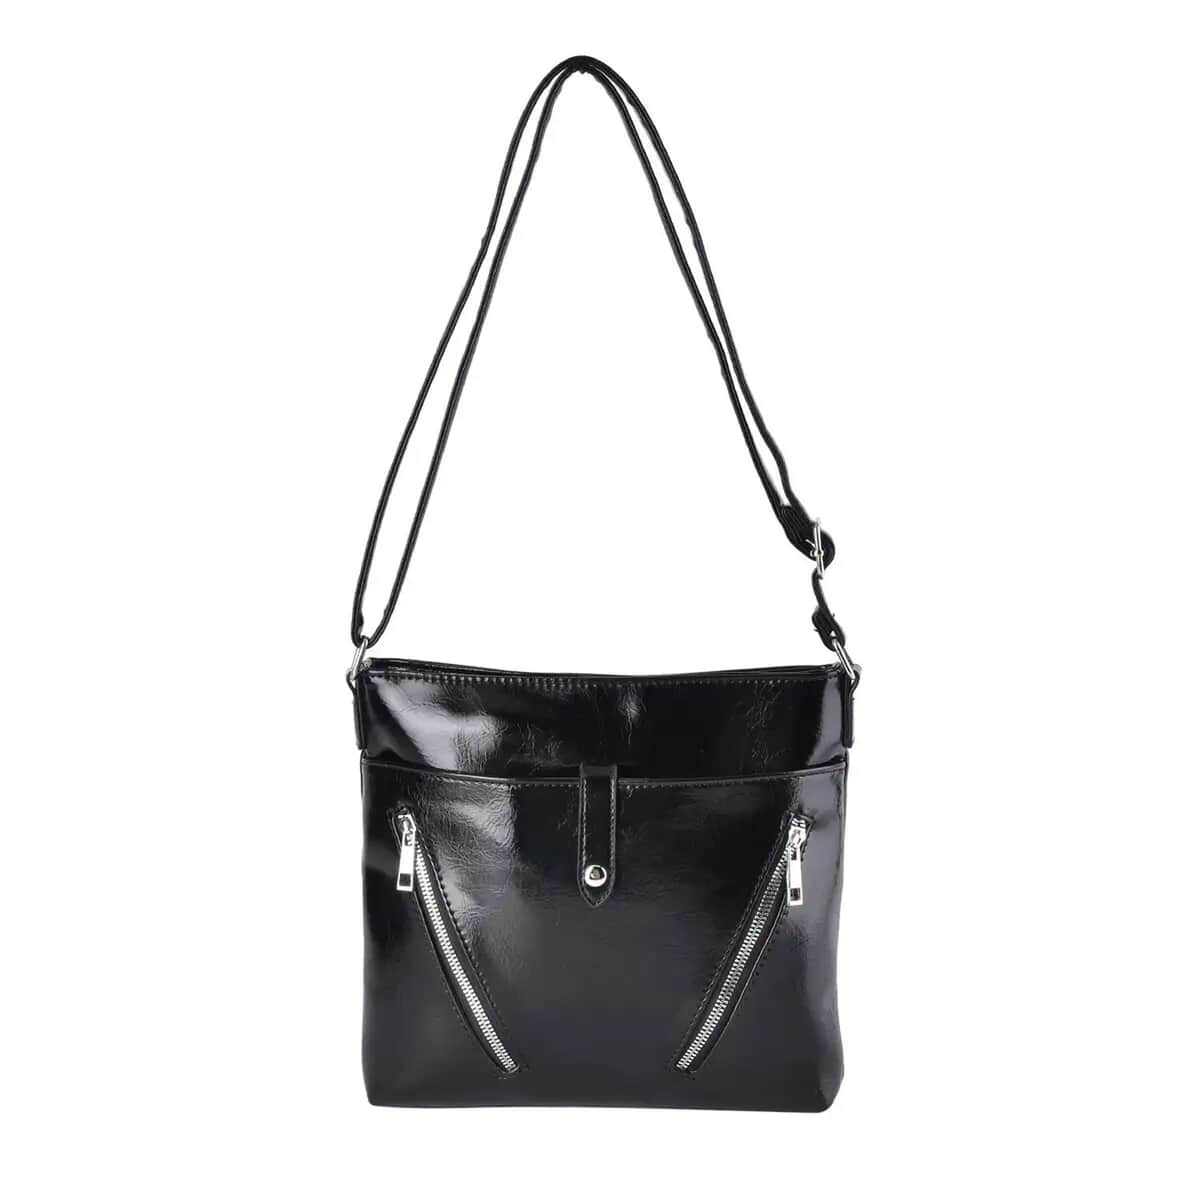 Black Faux Leather Crossbody Bag (9.45"x1.97"x9.45") with Shoulder Strap 47" image number 0